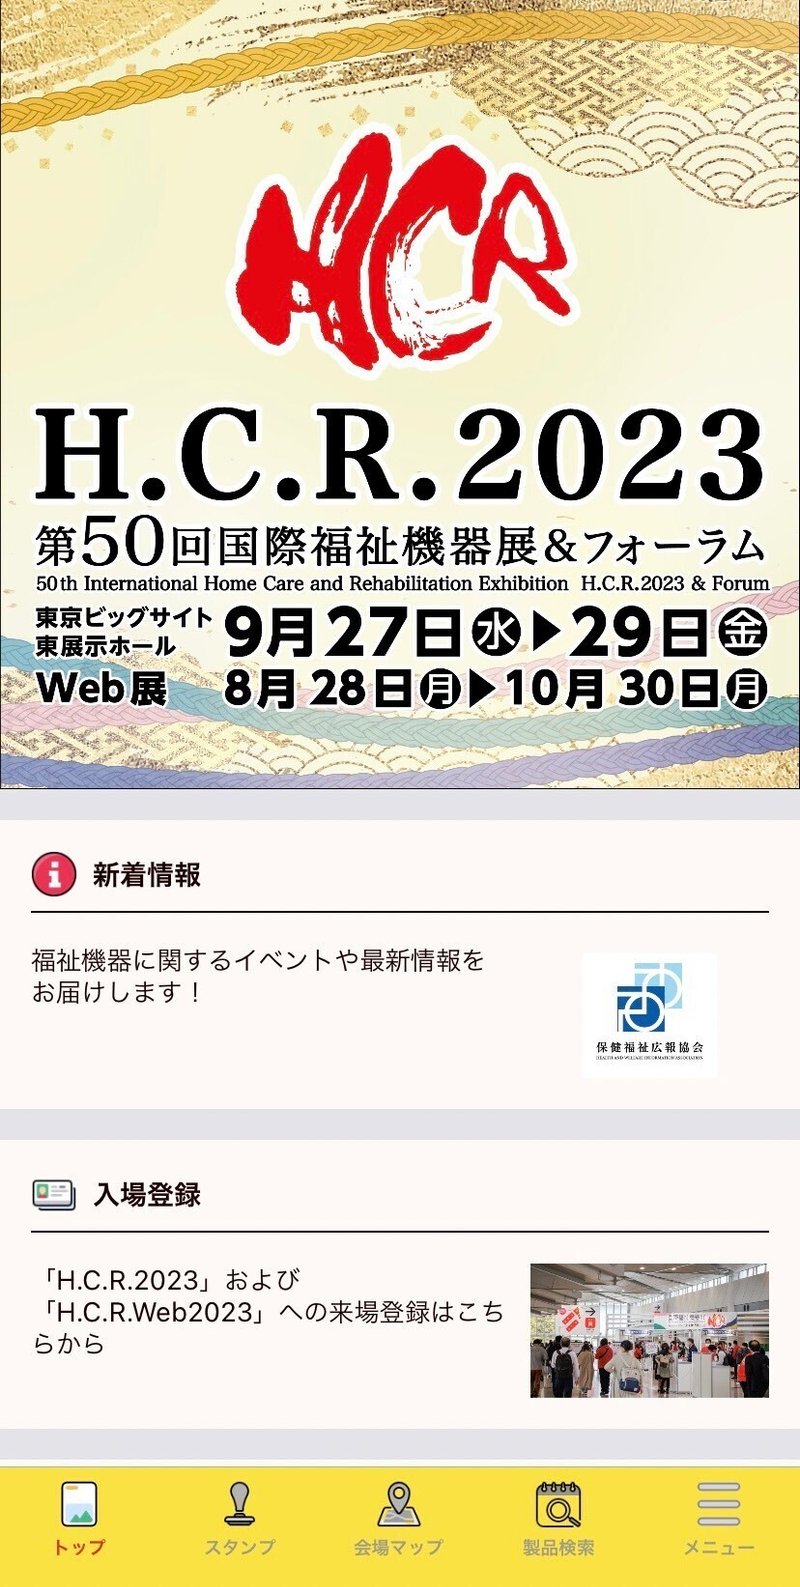 H.C.R.2023 第50回国際福祉機器展&フォーラム アプリ　トップ画面H.C.R.2023 The 50th International Home Care & Rehabilitation Exhibition & Forum Application Top Screen